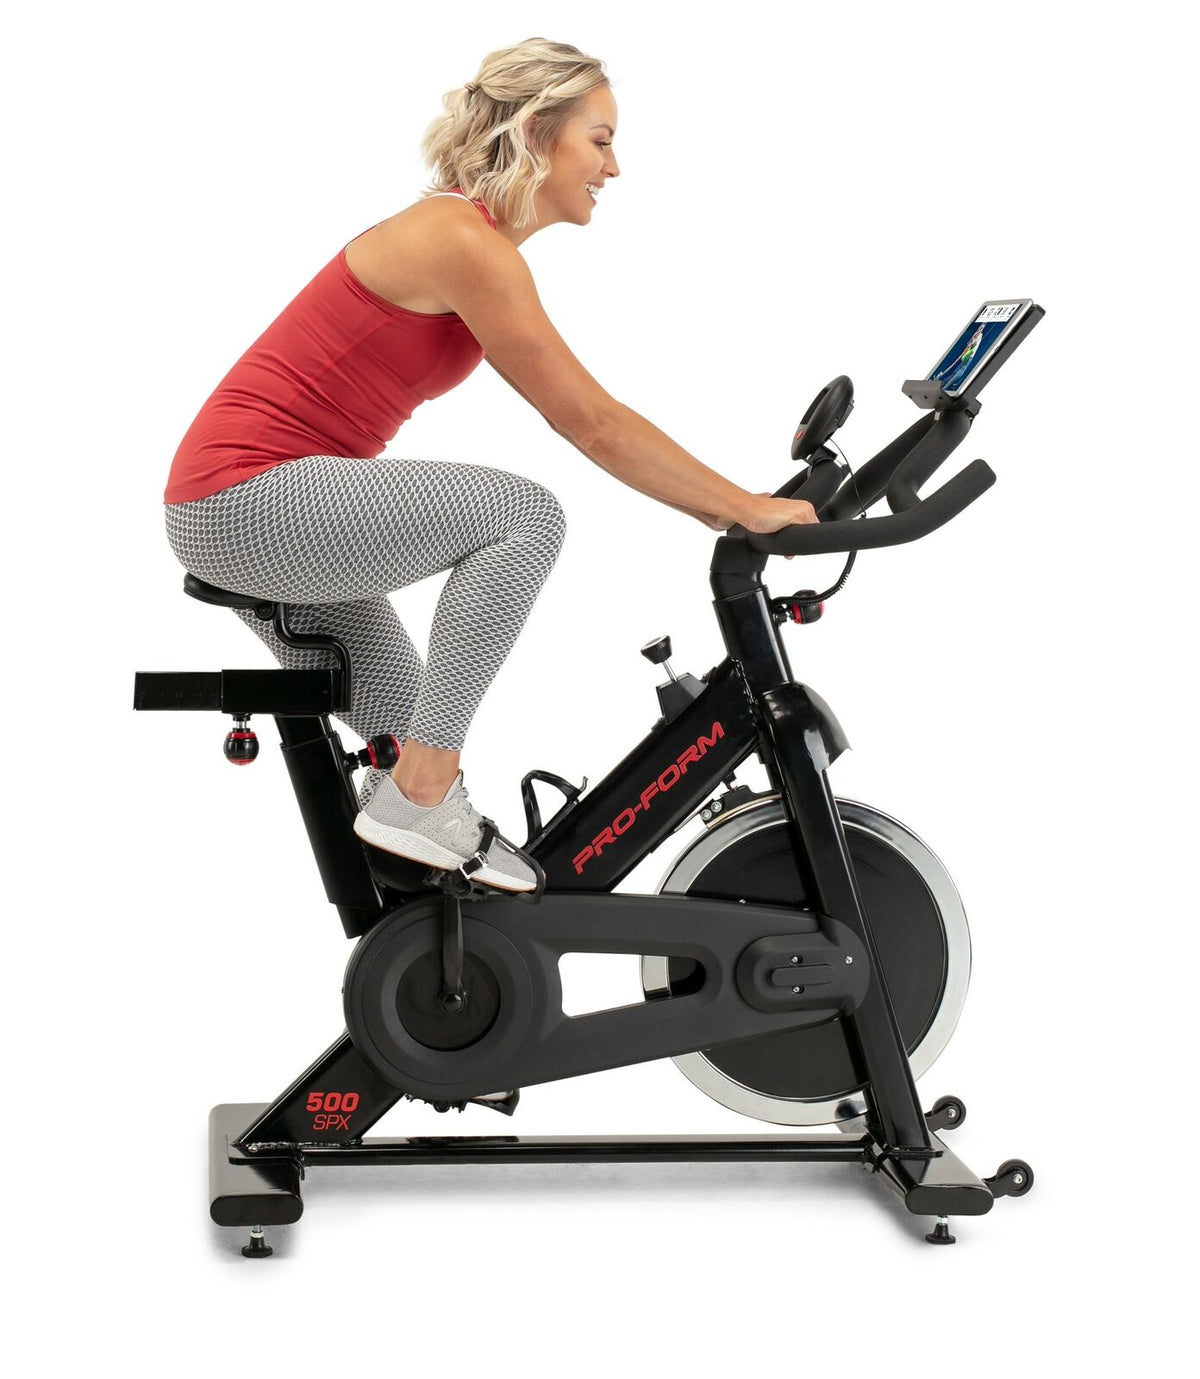 Proform 500 SPX Indoor Cycle (Brand New, Built and Tuned) – Mastery Fitness